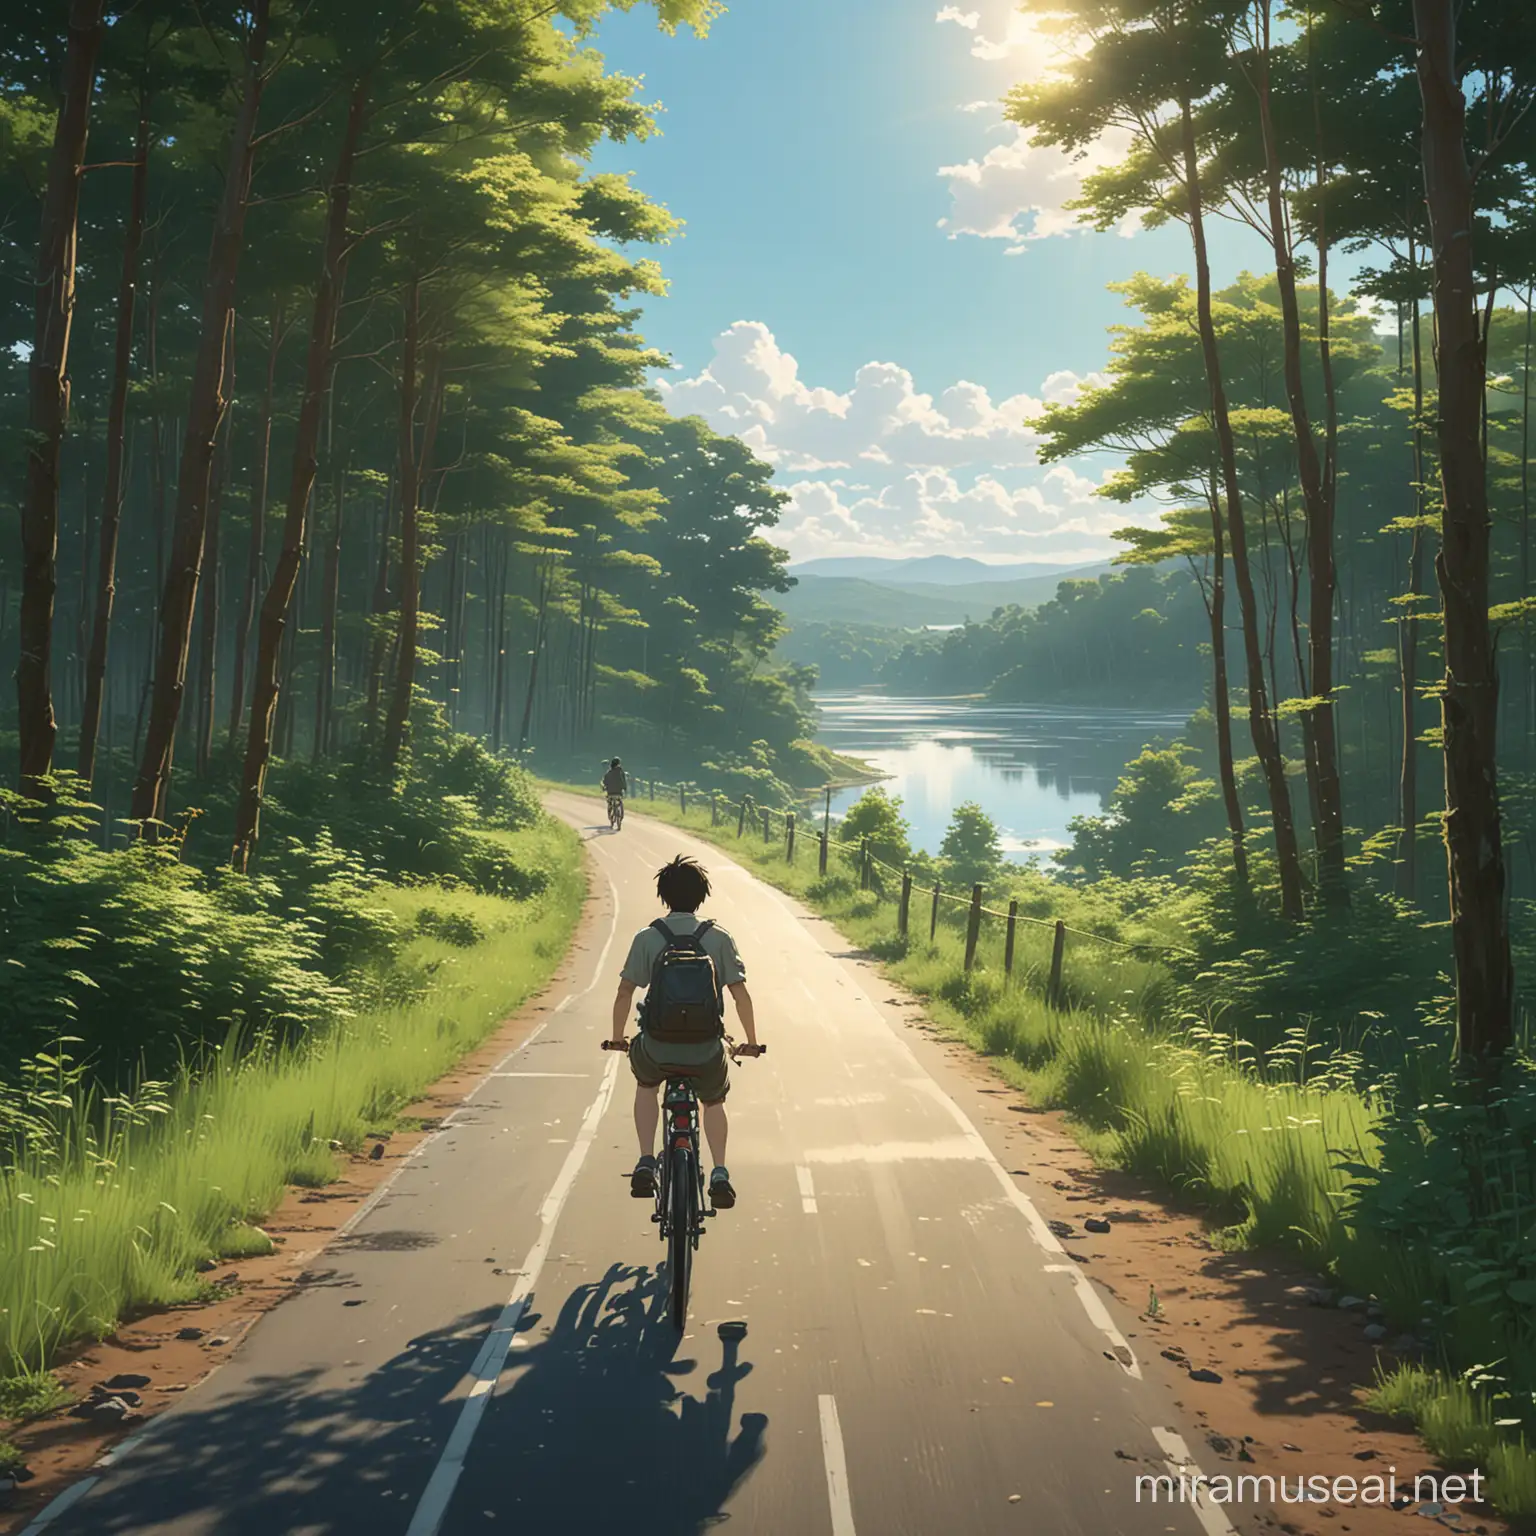 A young guy ride abycycle trough a little forest, overlooking the road ahead, with a beautiful lake beside the road, with dramatic lighting on a bright sunny days, in the anime style of Makoto SHinkai, Atey Ghalian, Studio Ghibli, And Hayao Mizaki, High resolution, High Contrast, High quality, High Detail and intricate, an epic shot, a masterpiece